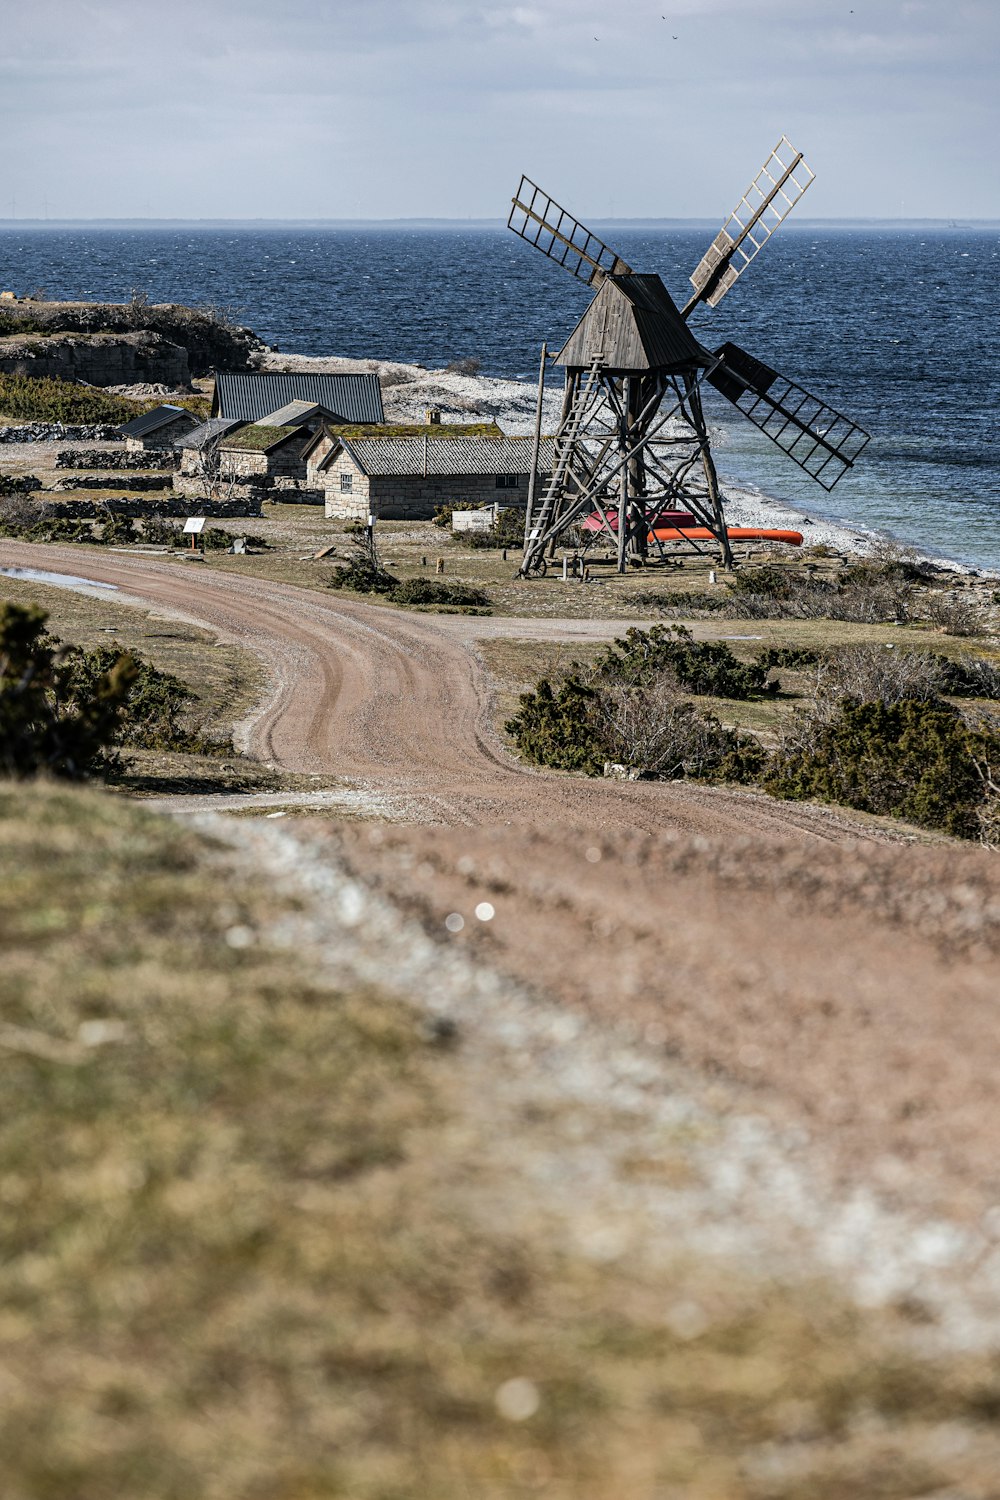 a windmill on the side of a dirt road next to the ocean